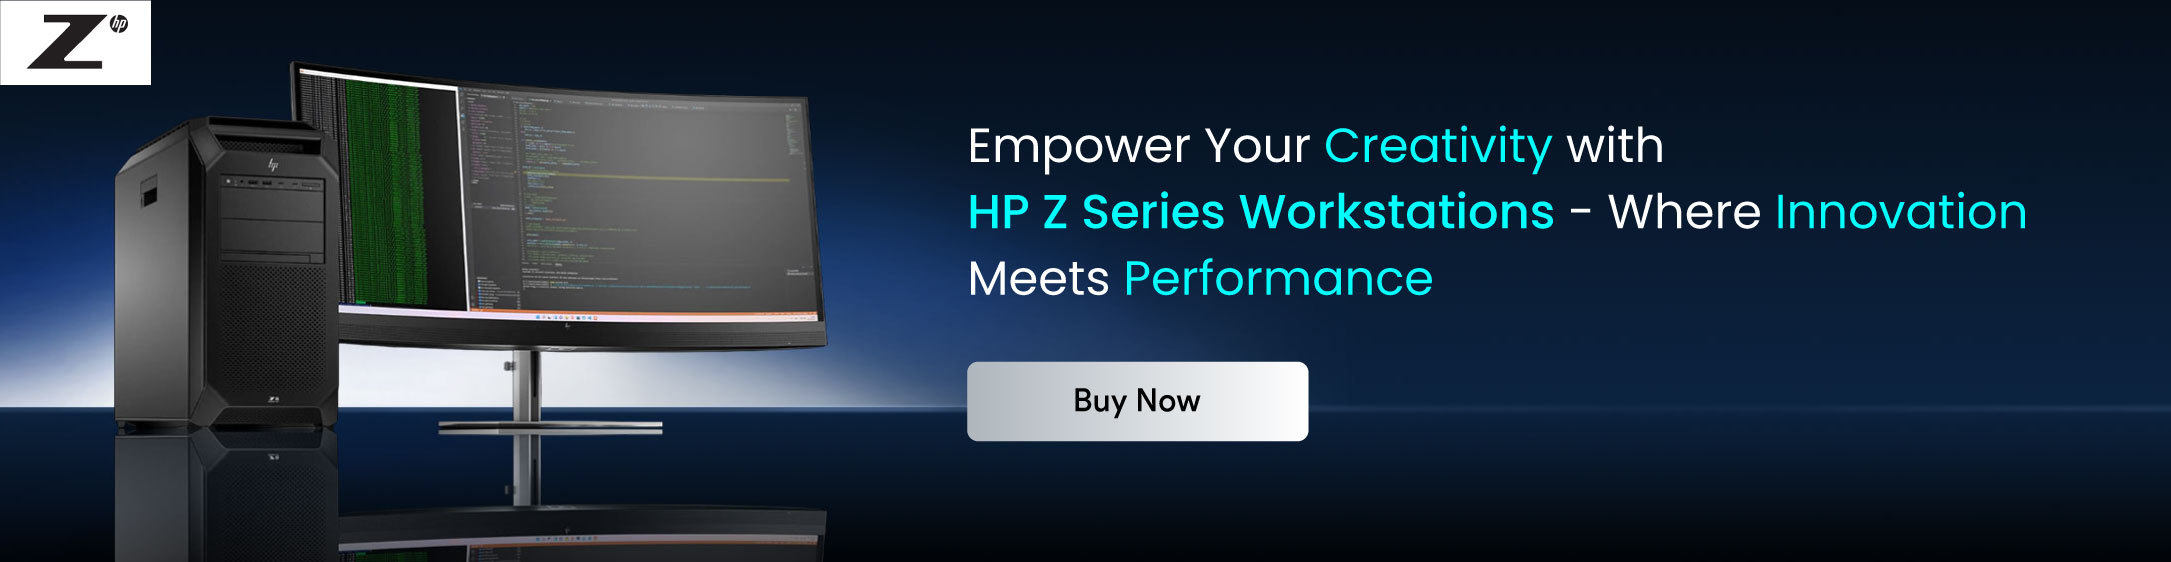 HP-Z-SERIES-WORKSTATIONS